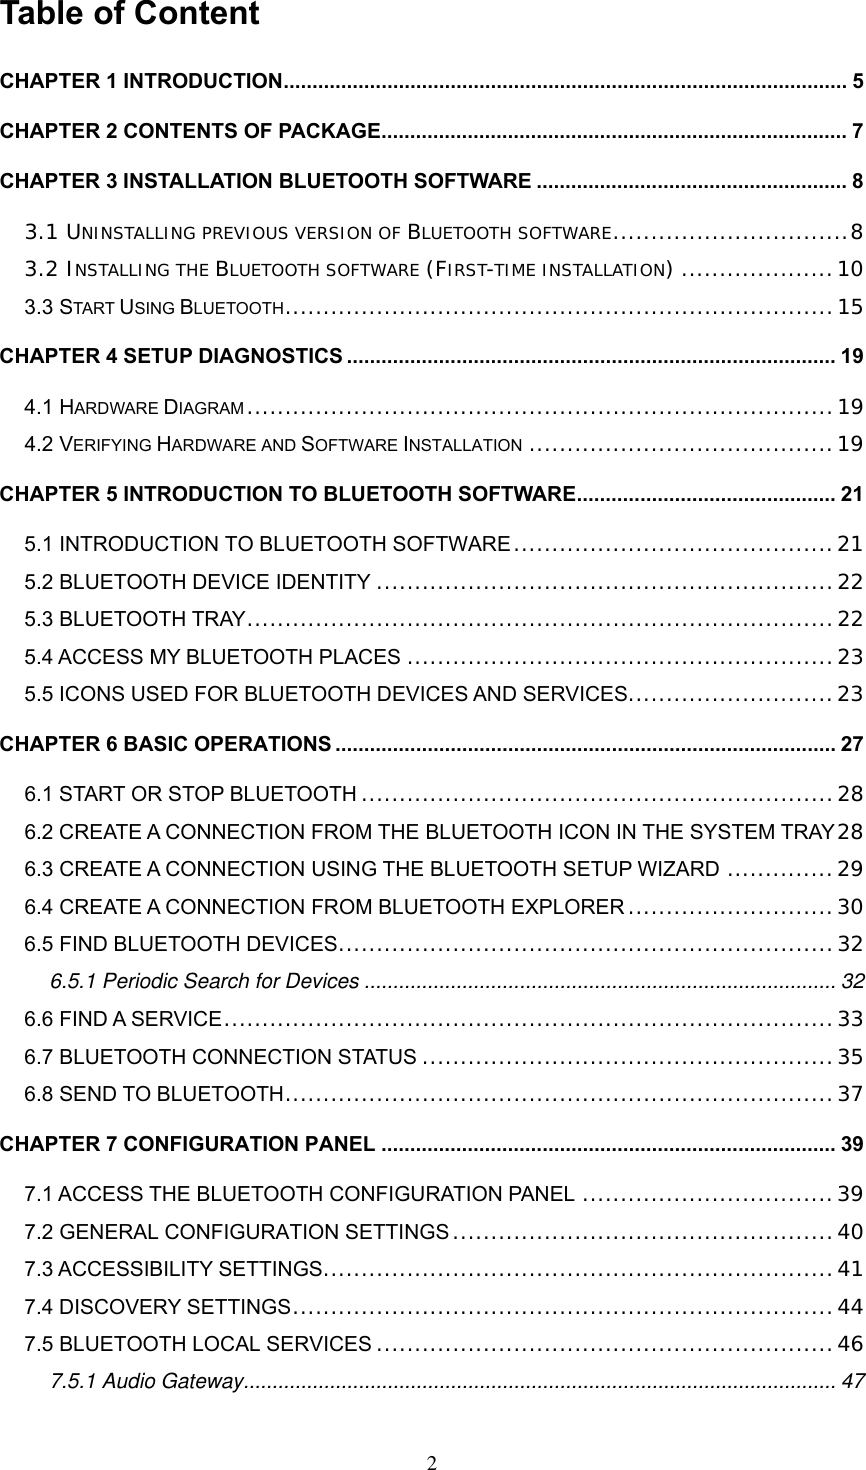 Table of Content CHAPTER 1 INTRODUCTION.................................................................................................. 5 CHAPTER 2 CONTENTS OF PACKAGE................................................................................. 7 CHAPTER 3 INSTALLATION BLUETOOTH SOFTWARE ...................................................... 8 3.1 UNINSTALLING PREVIOUS VERSION OF BLUETOOTH SOFTWARE...............................8 3.2 INSTALLING THE BLUETOOTH SOFTWARE (FIRST-TIME INSTALLATION) ....................10 3.3 START USING BLUETOOTH........................................................................15 CHAPTER 4 SETUP DIAGNOSTICS ..................................................................................... 19 4.1 HARDWARE DIAGRAM .............................................................................19 4.2 VERIFYING HARDWARE AND SOFTWARE INSTALLATION ........................................19 CHAPTER 5 INTRODUCTION TO BLUETOOTH SOFTWARE............................................. 21 5.1 INTRODUCTION TO BLUETOOTH SOFTWARE..........................................21 5.2 BLUETOOTH DEVICE IDENTITY ............................................................22 5.3 BLUETOOTH TRAY.............................................................................22 5.4 ACCESS MY BLUETOOTH PLACES ........................................................23 5.5 ICONS USED FOR BLUETOOTH DEVICES AND SERVICES...........................23 CHAPTER 6 BASIC OPERATIONS ....................................................................................... 27 6.1 START OR STOP BLUETOOTH ..............................................................28 6.2 CREATE A CONNECTION FROM THE BLUETOOTH ICON IN THE SYSTEM TRAY 28 6.3 CREATE A CONNECTION USING THE BLUETOOTH SETUP WIZARD ..............29 6.4 CREATE A CONNECTION FROM BLUETOOTH EXPLORER ...........................30 6.5 FIND BLUETOOTH DEVICES.................................................................32 6.5.1 Periodic Search for Devices .................................................................................. 32 6.6 FIND A SERVICE................................................................................33 6.7 BLUETOOTH CONNECTION STATUS ......................................................35 6.8 SEND TO BLUETOOTH........................................................................37 CHAPTER 7 CONFIGURATION PANEL ............................................................................... 39 7.1 ACCESS THE BLUETOOTH CONFIGURATION PANEL .................................39 7.2 GENERAL CONFIGURATION SETTINGS ..................................................40 7.3 ACCESSIBILITY SETTINGS...................................................................41 7.4 DISCOVERY SETTINGS.......................................................................44 7.5 BLUETOOTH LOCAL SERVICES ............................................................46 7.5.1 Audio Gateway....................................................................................................... 47  2 